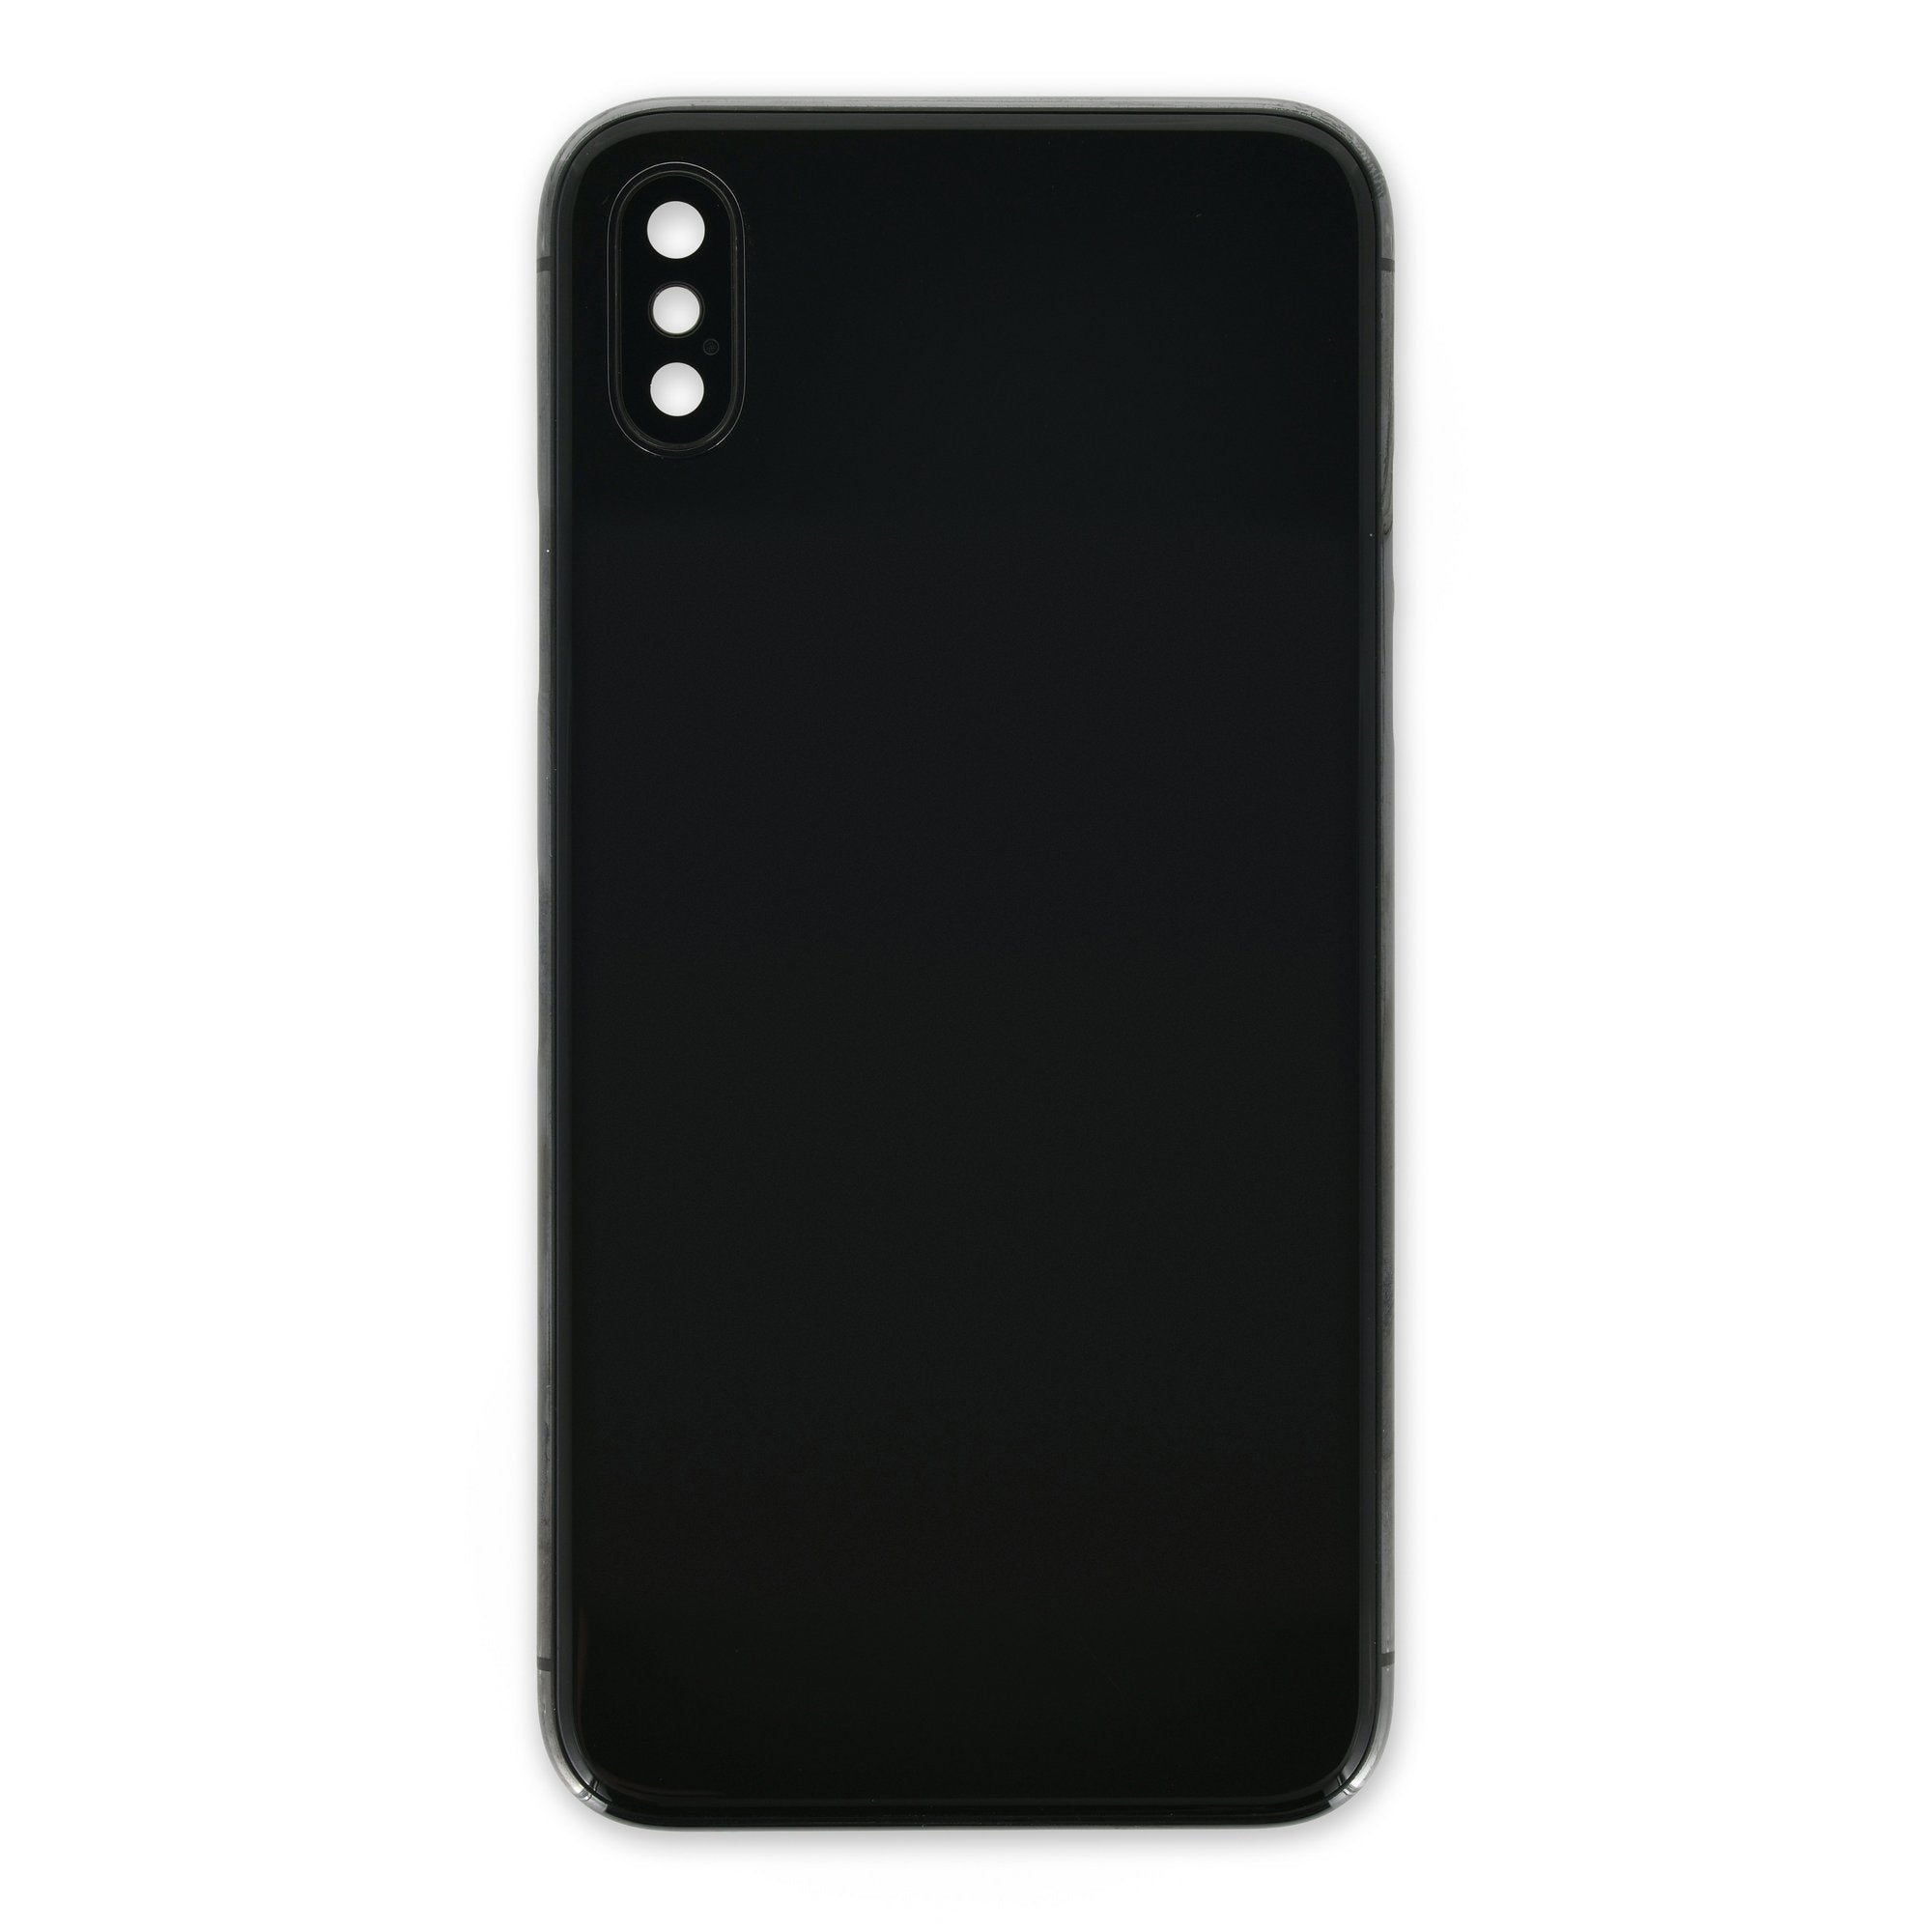 iPhone X Aftermarket Blank Rear Case Glossy Black New Without Cables